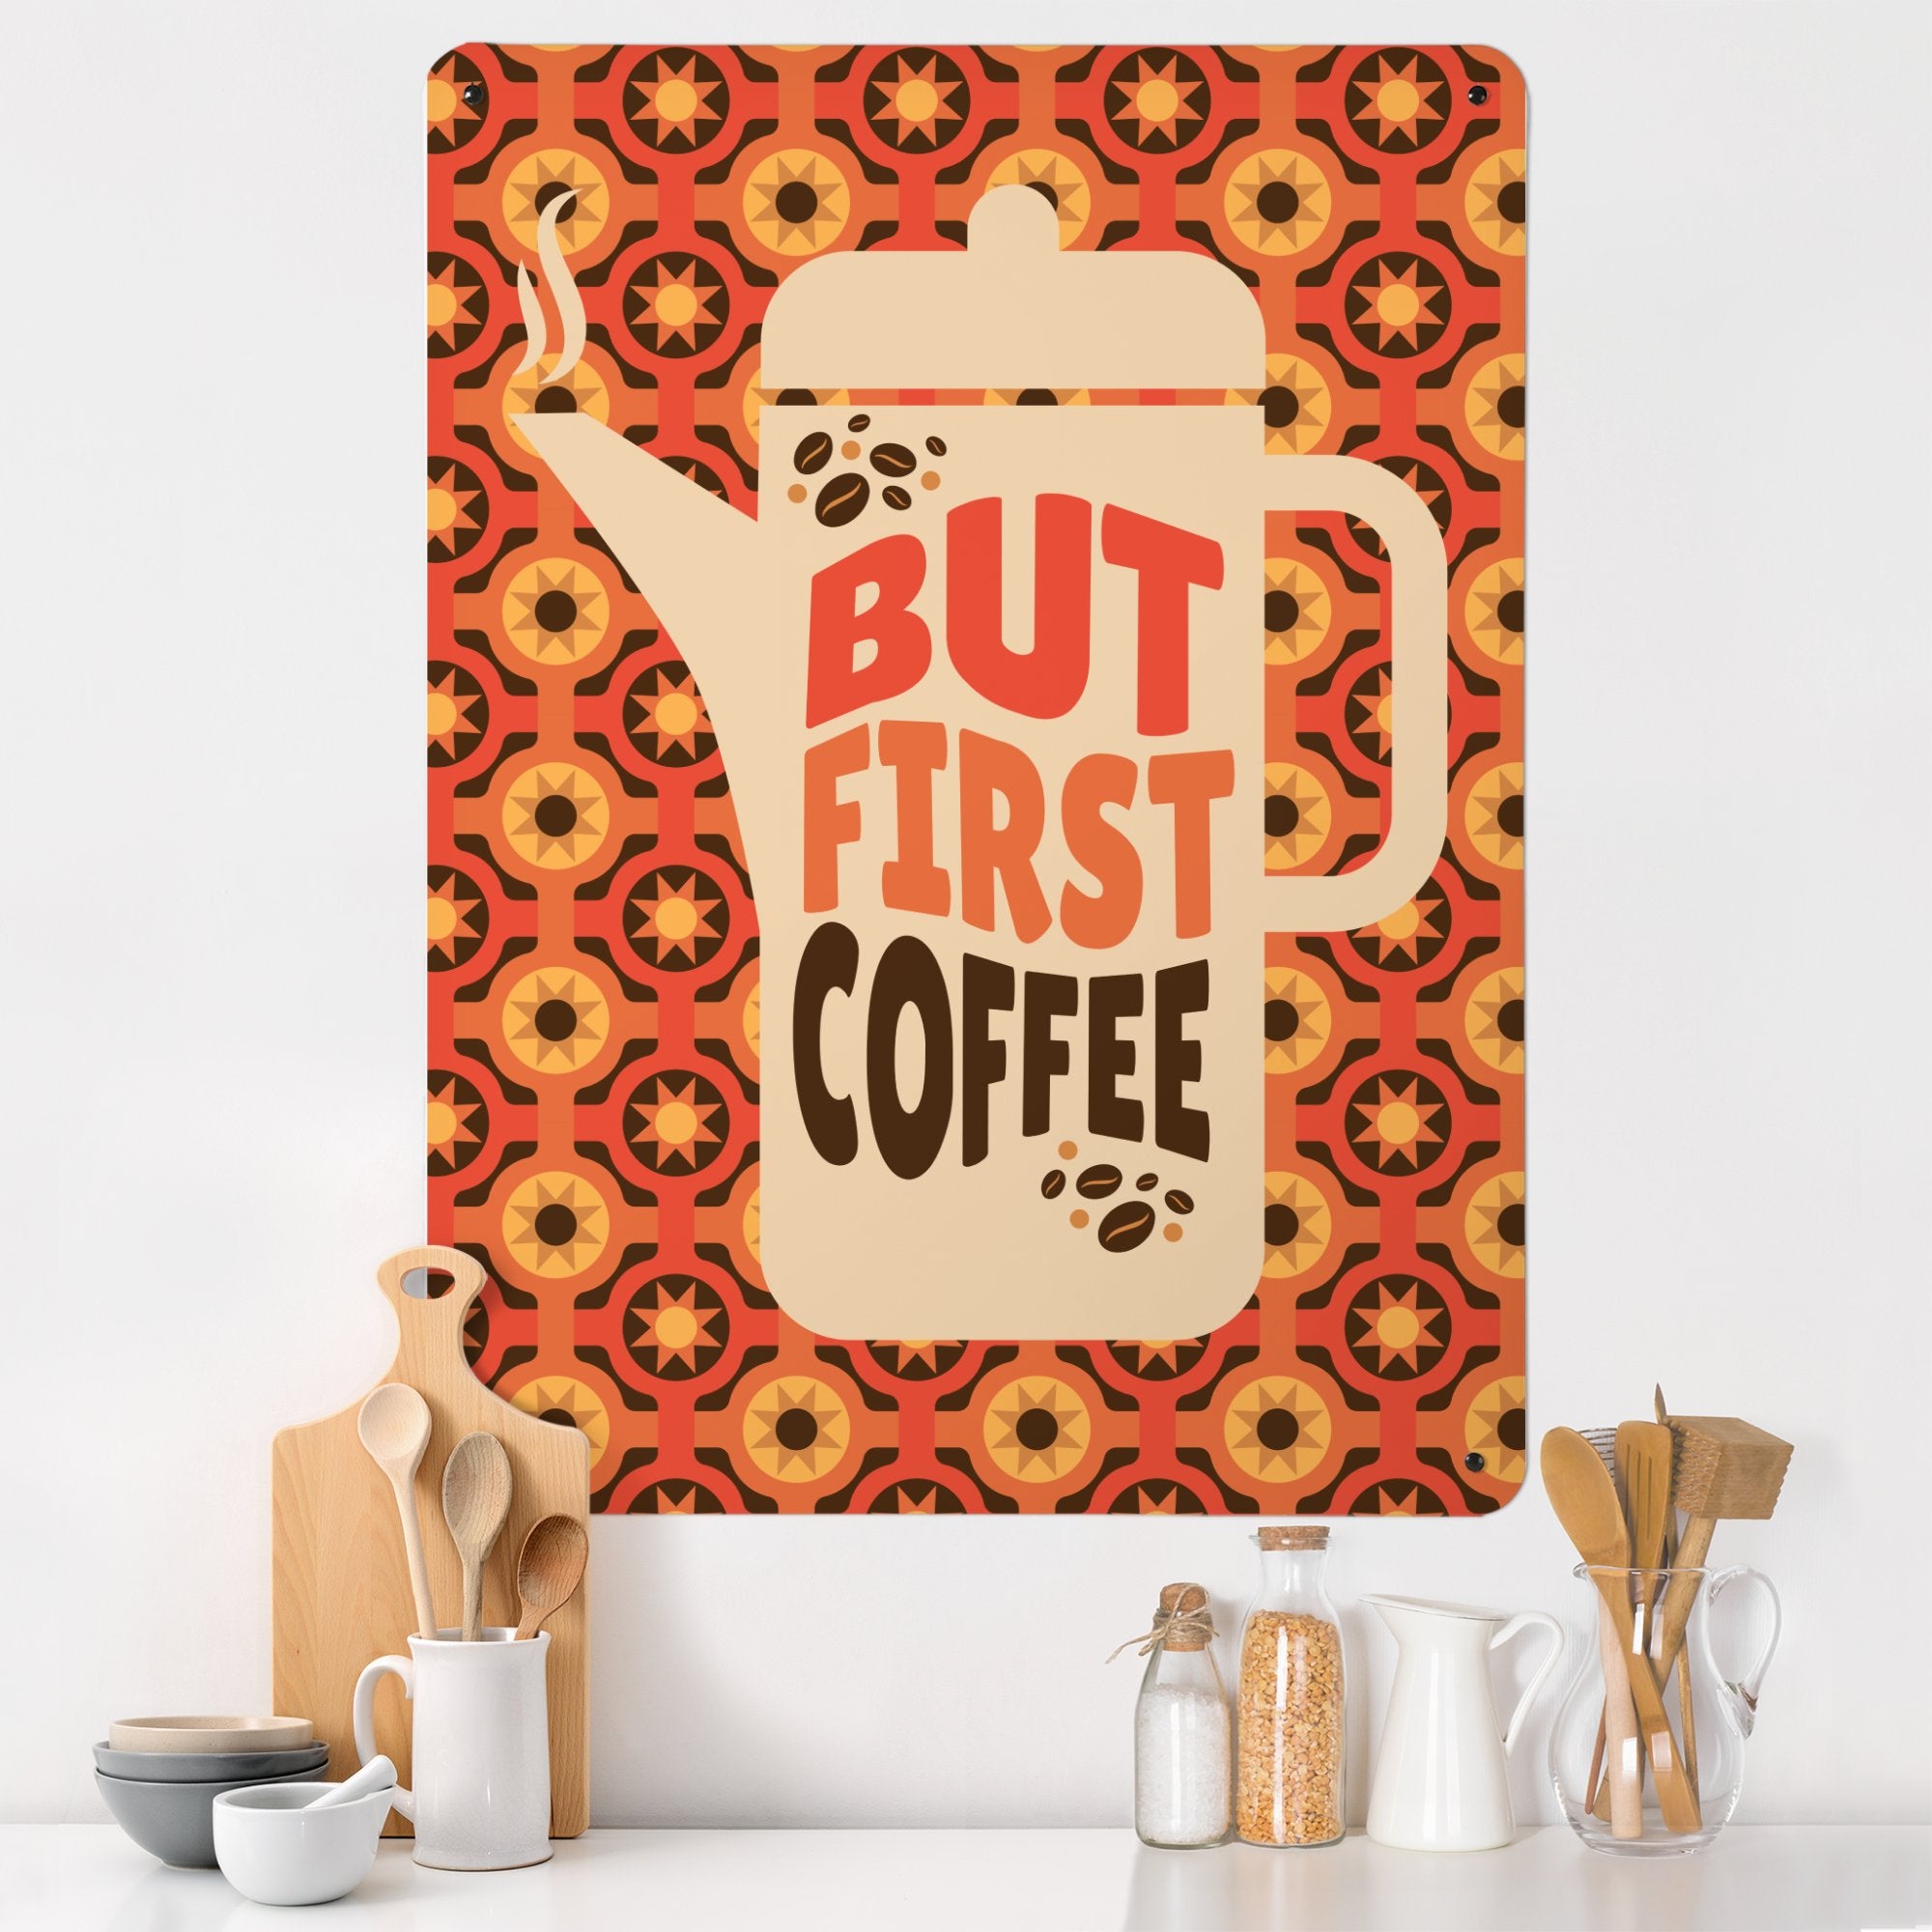 A large magnetic notice board showing a design of a  coffee pot with a quote that reads 'but first coffee' with a seventies style orange and brown pattern behind in a kitchen setting with wooden spoons and other kitchen utensils